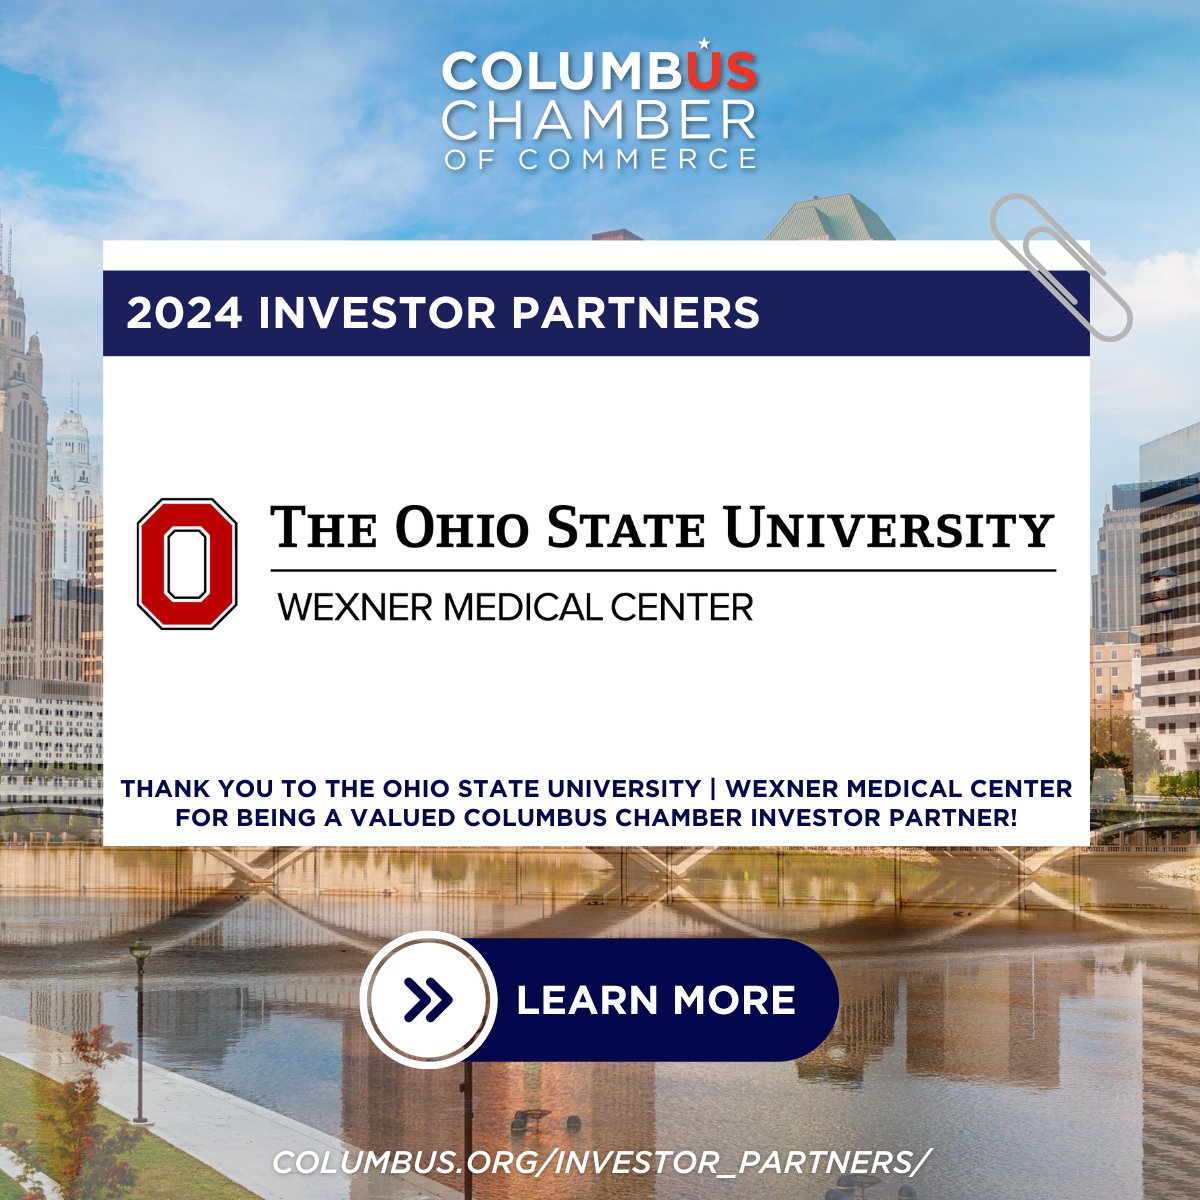 Thank you to The Ohio State University Wexner Medical Center (@OSUWexMed) for being a valued Columbus Chamber Investor Partner! Learn more about @OSUWexMed: wexnermedical.osu.edu.

💡 Learn more about becoming an Investor Partner: columbus.org/investor_partn…